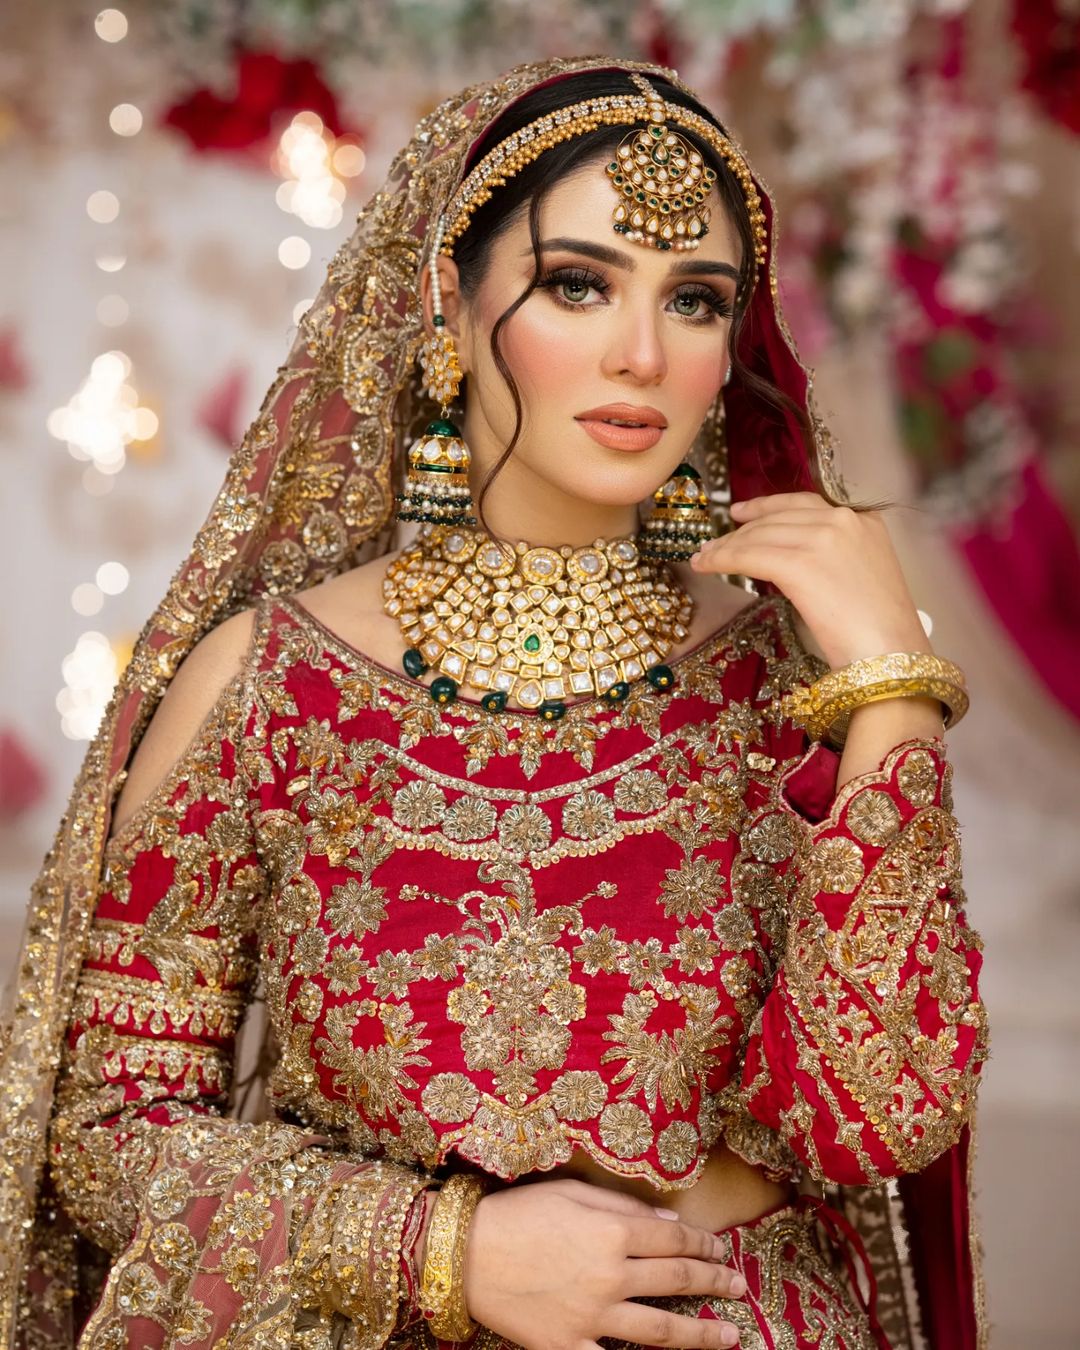  Bridal Makeup, Royalty Is Not Having To Say And Yet The Message Is Conveyed Bridal Makeup Trends And Ideas For Muslim Wedding